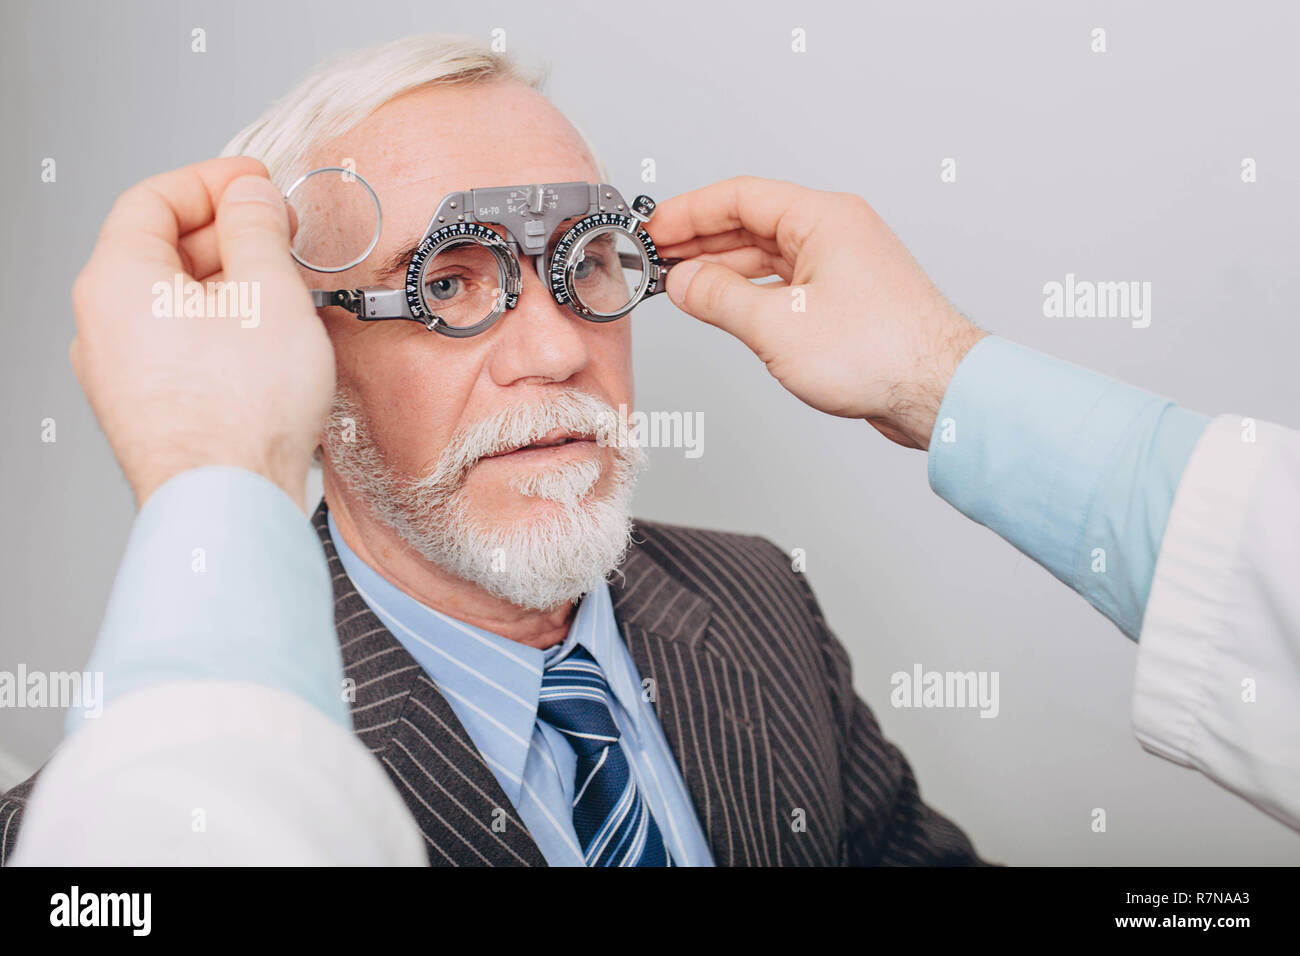 Eye doctor examining old man's vision using a trial frame Stock Photo